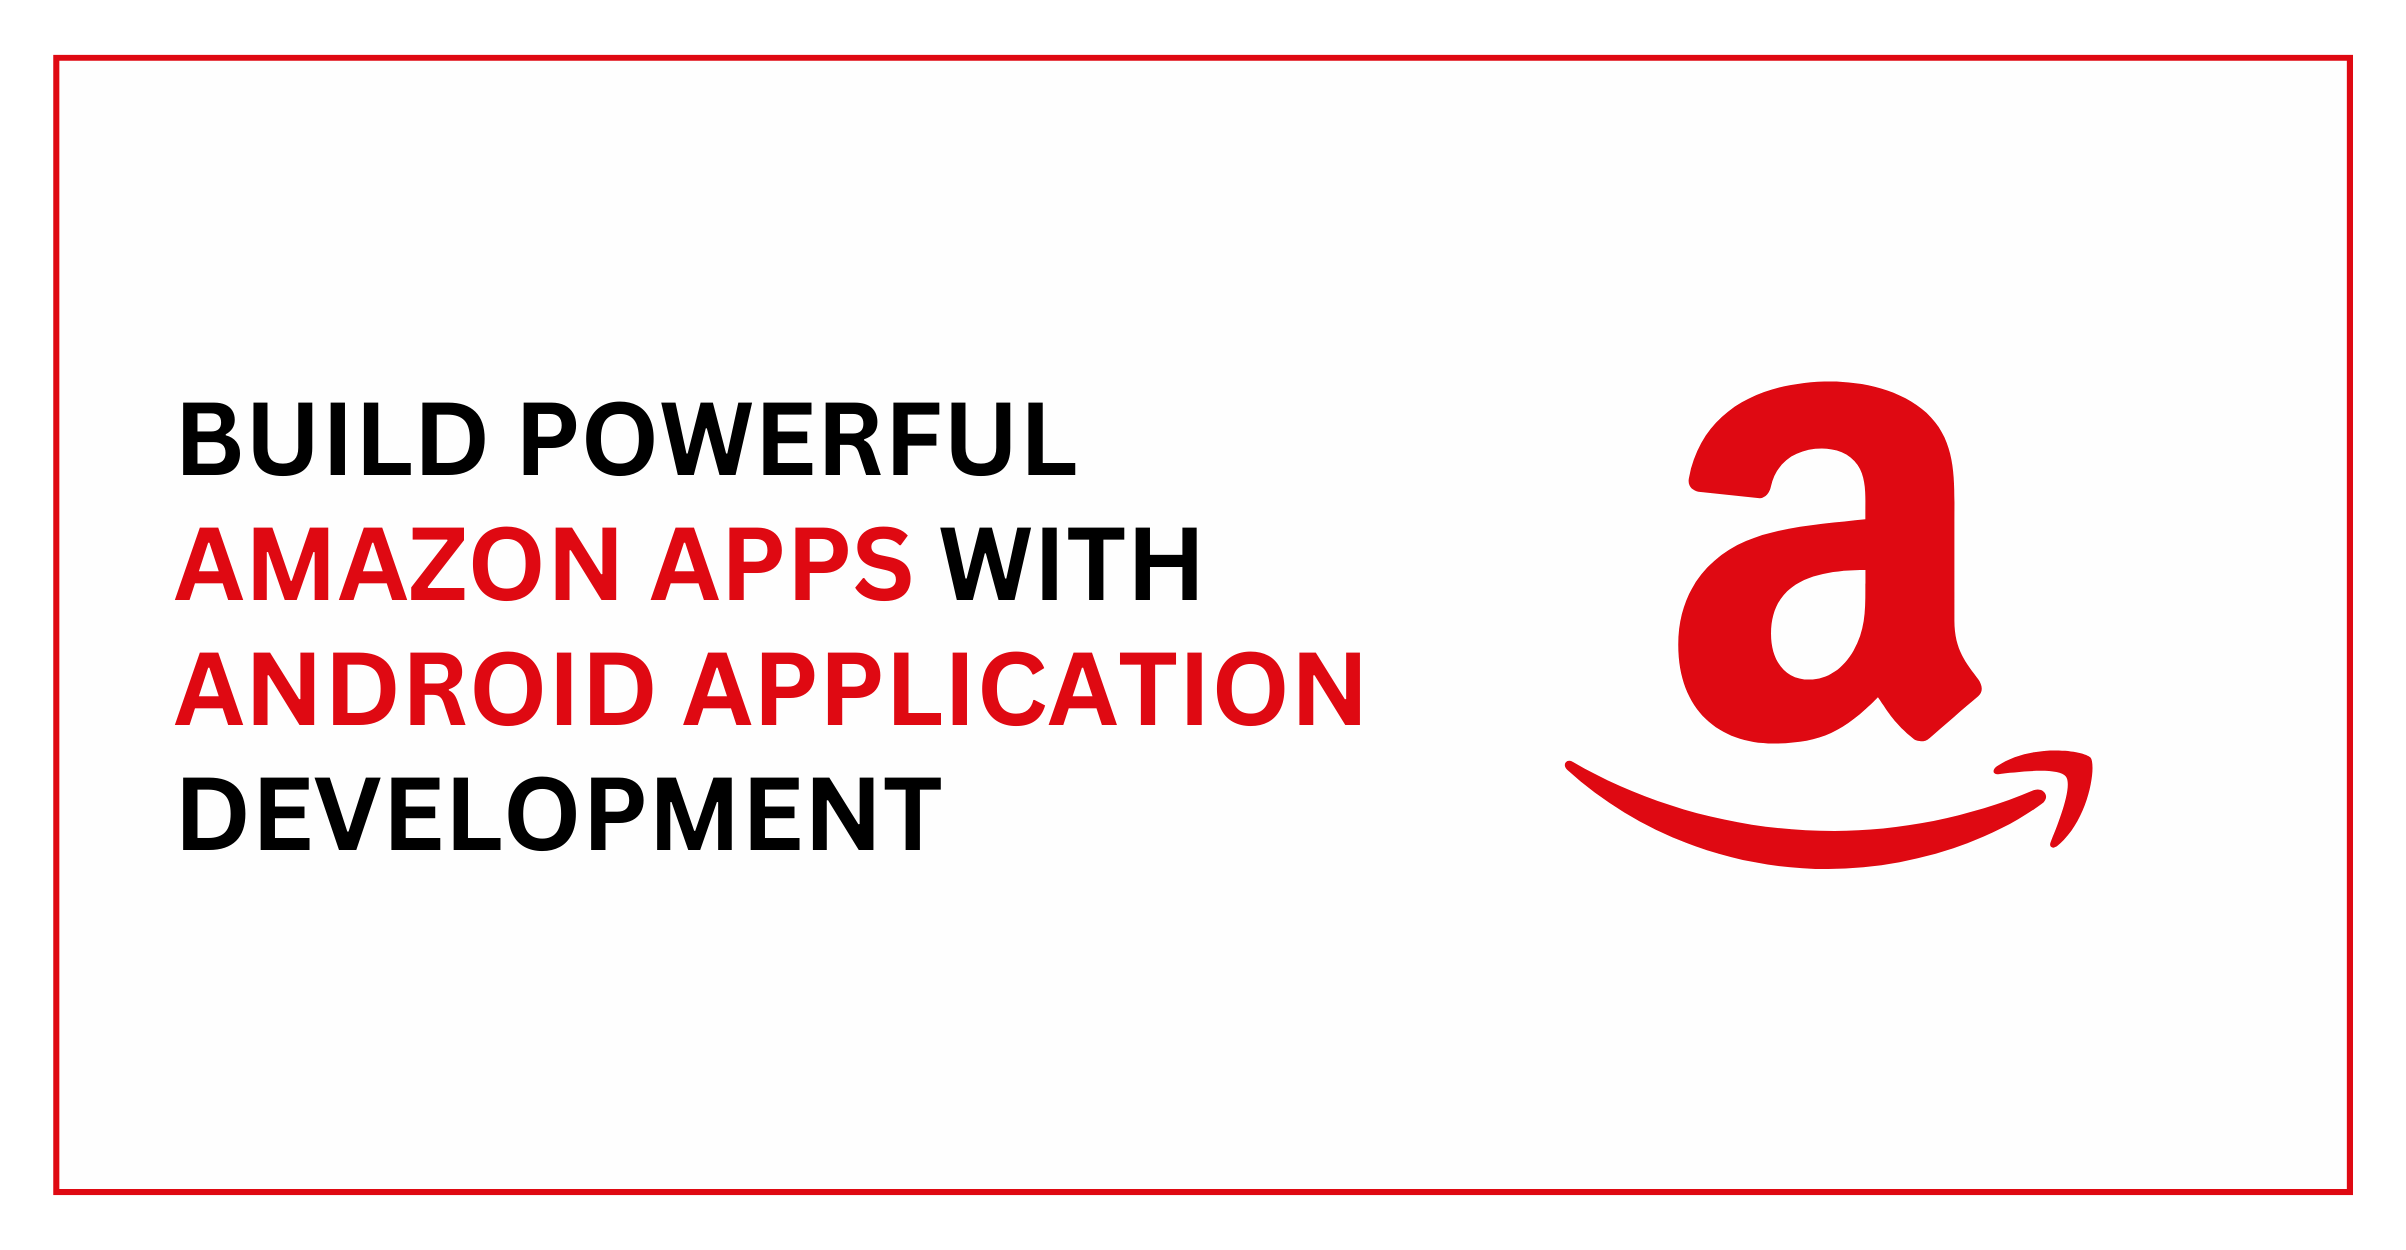 BUILD POWERFUL AMAZON APPS WITH ANDROID APPLICATION DEVELOPMENT